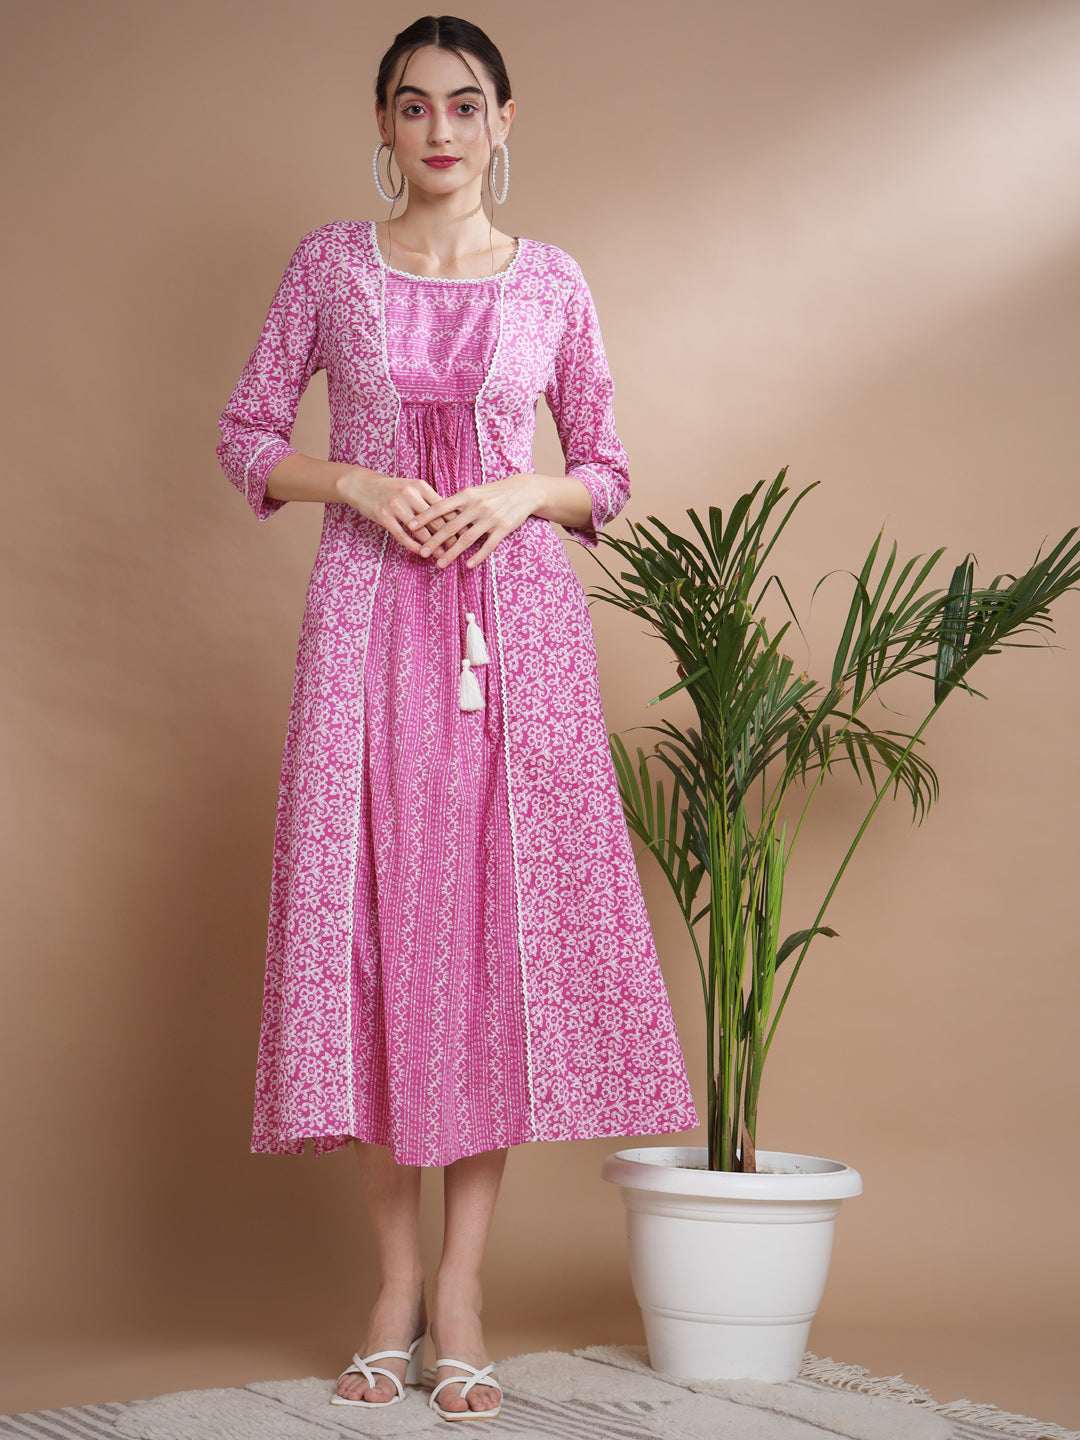 Women's Pink Floral Printed Gown Dress - Myshka